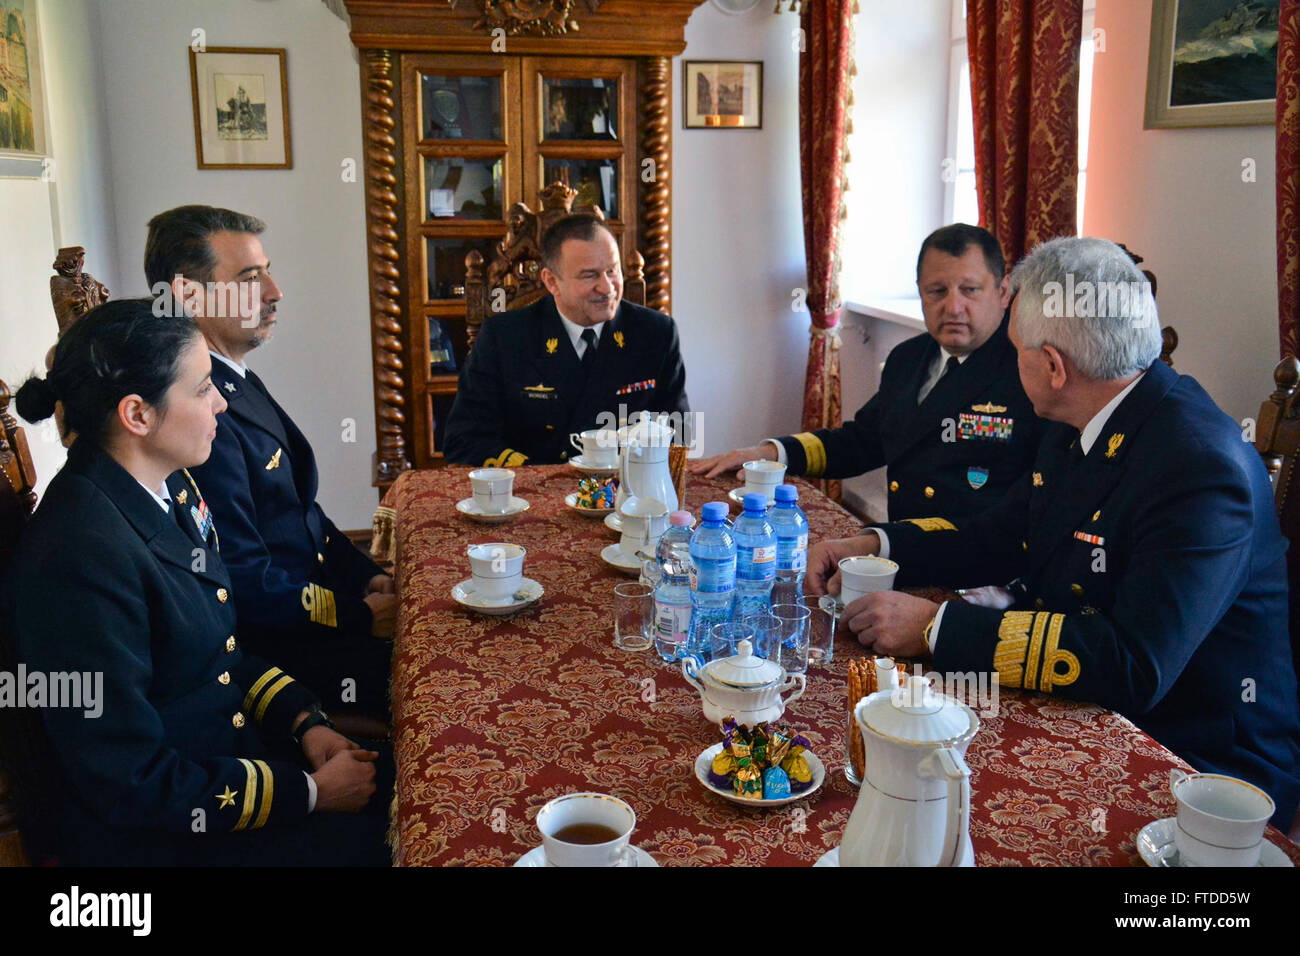 150605-N-IY633-020 GDYNIA, Poland (June 5, 2015) – Standing NATO Maritime Group 2 (SNMG2) and Polish Armed Forces leadership meet during SNMG2’s port visit to the city in preparation for exercise Baltic Operations (BALTOPS). BALTOPS is an annually reoccurring multinational exercise designed to enhance flexibility and interoperability, as well as demonstrate resolve of Allied and partner forces to defend the Baltic region. (U.S. Navy photo by Mass Communication Specialist 2nd Class Amanda S. Kitchner/Released) Stock Photo